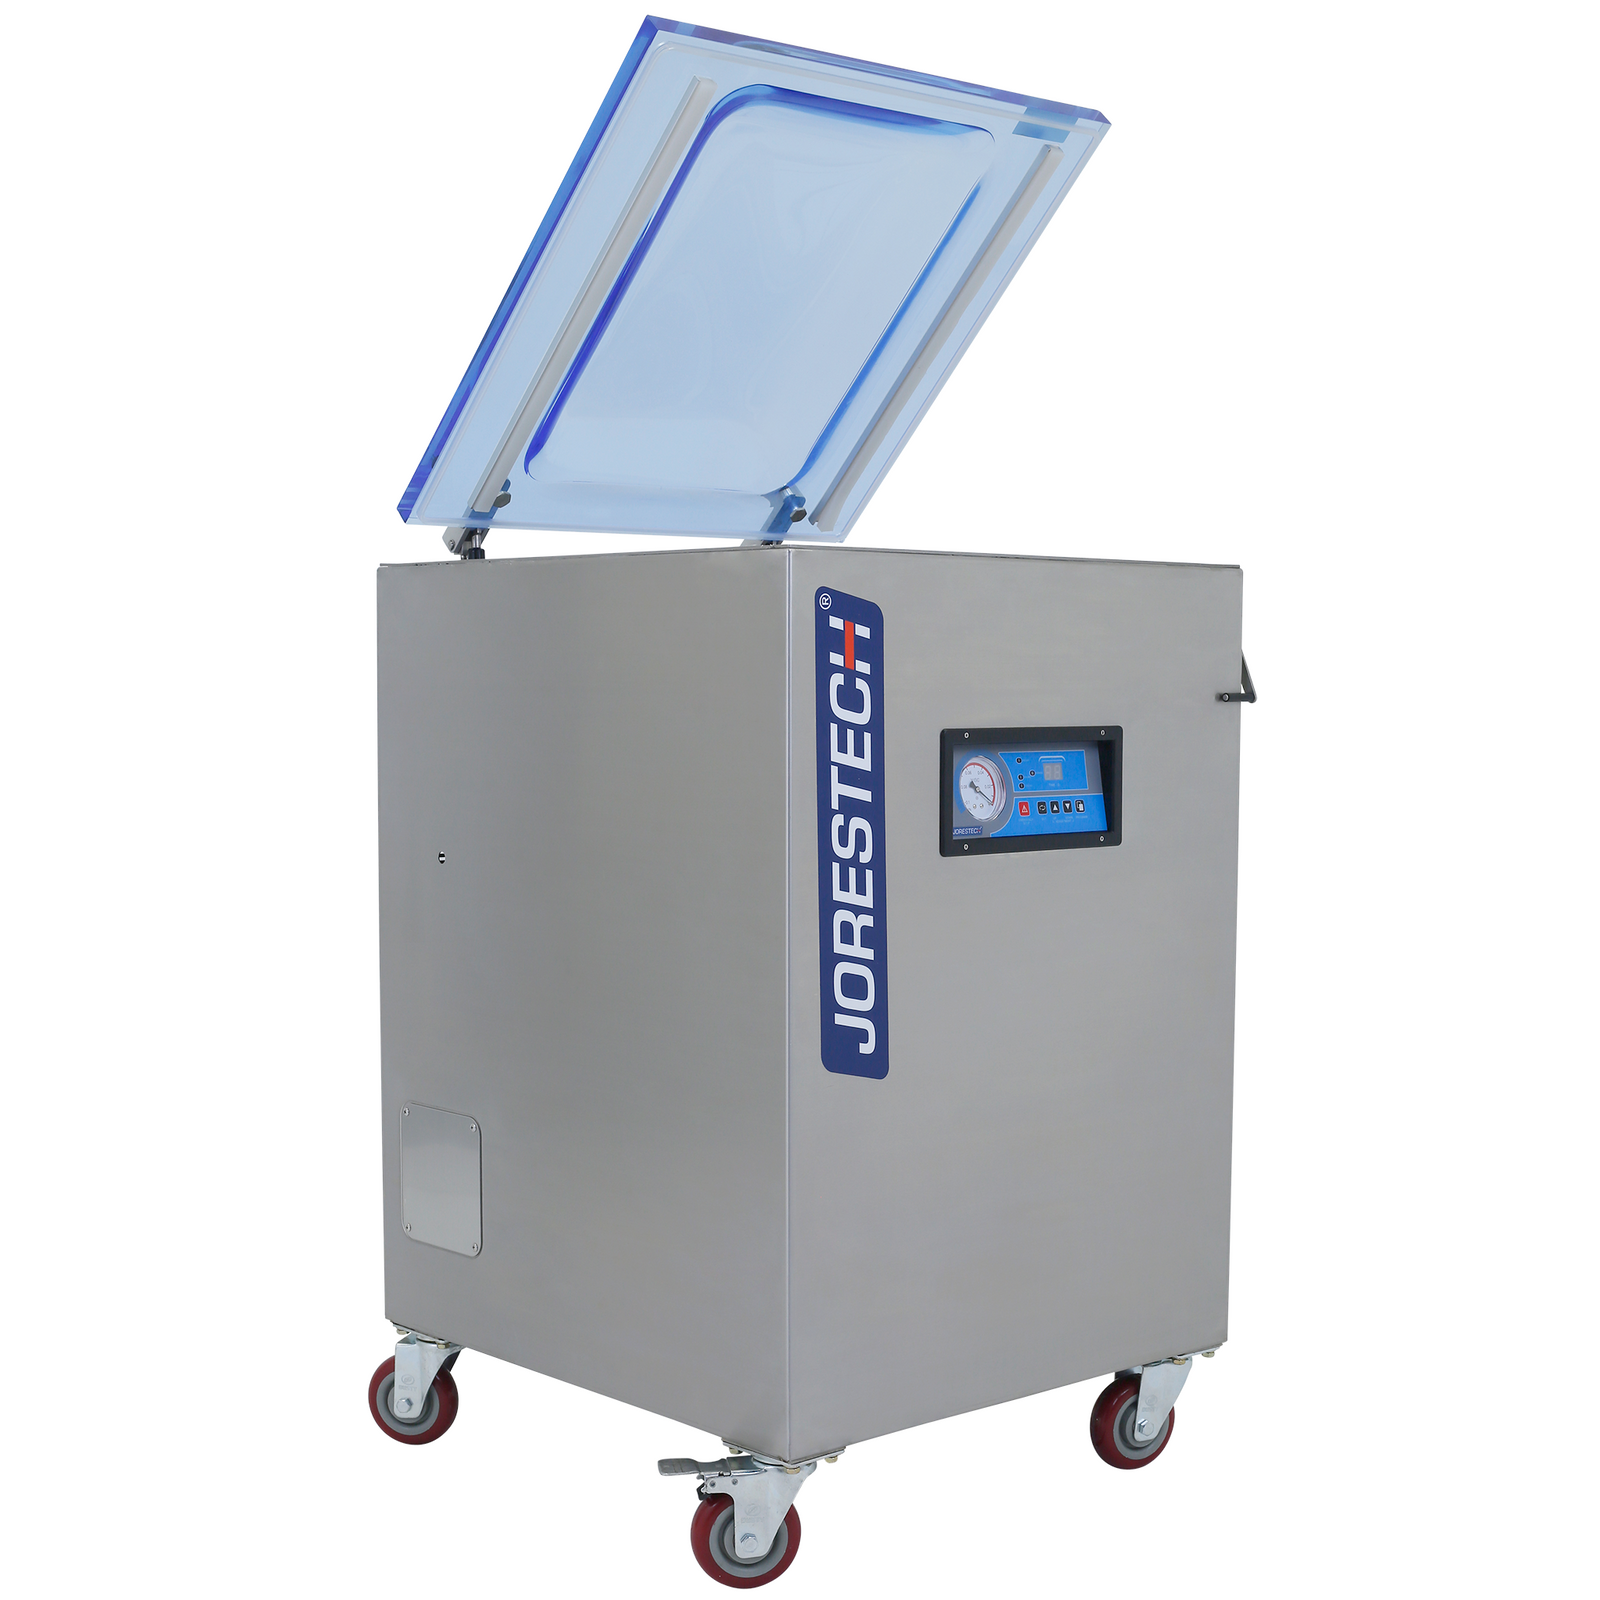 Side of the JORES TECHNOLOGIES® single chamber, self standing vacuum sealer. The machine is on wheels and has the lid open